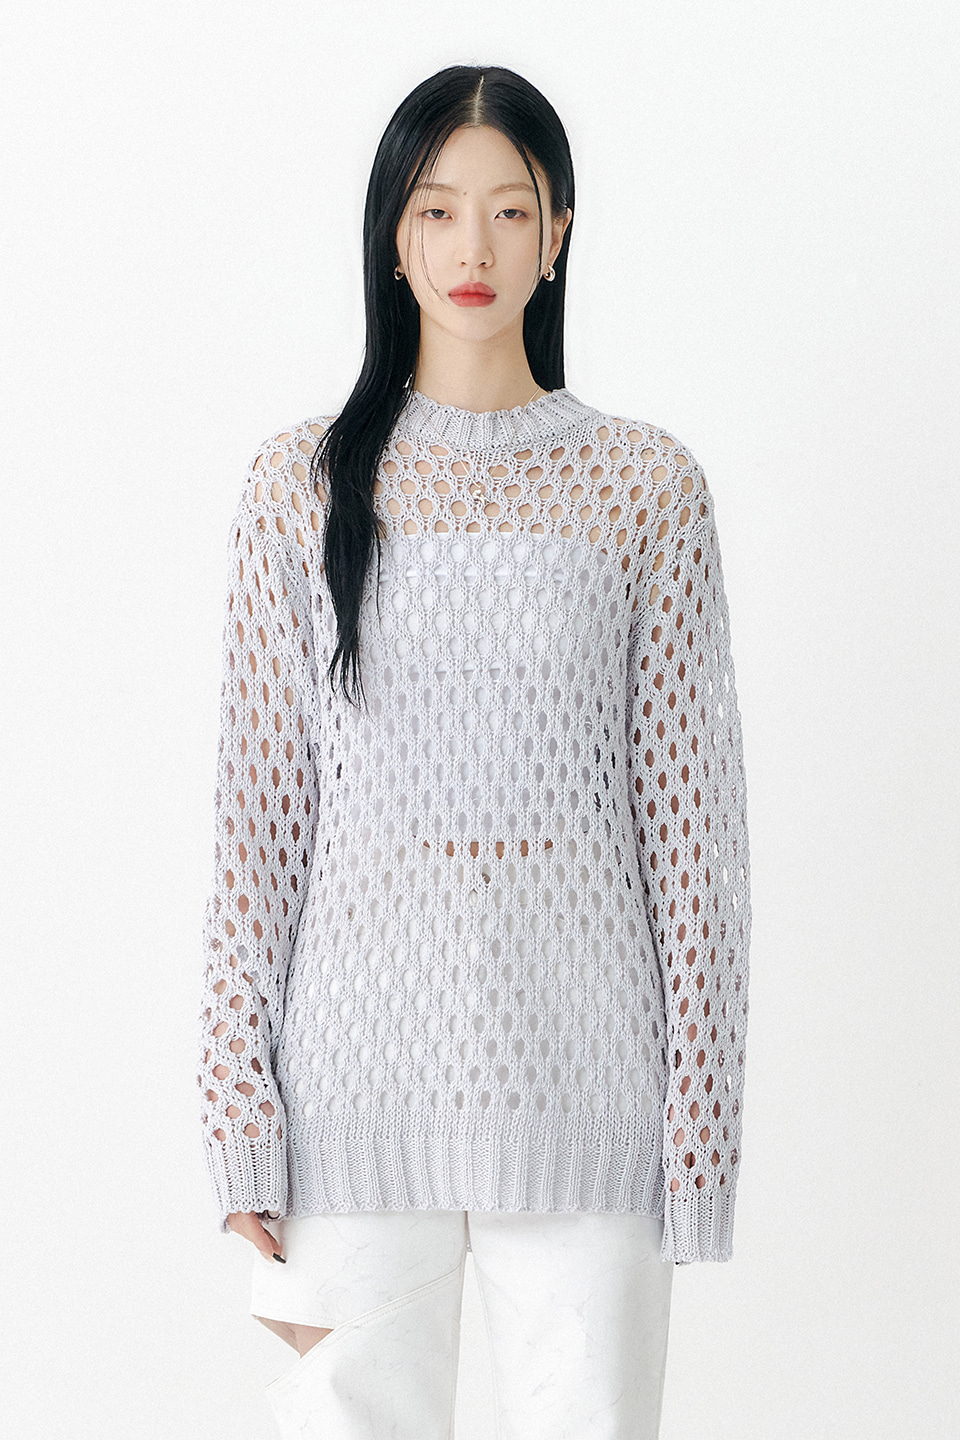 [UNISEX] PAPER MESH LOOSE KNIT - LILAC GRAY